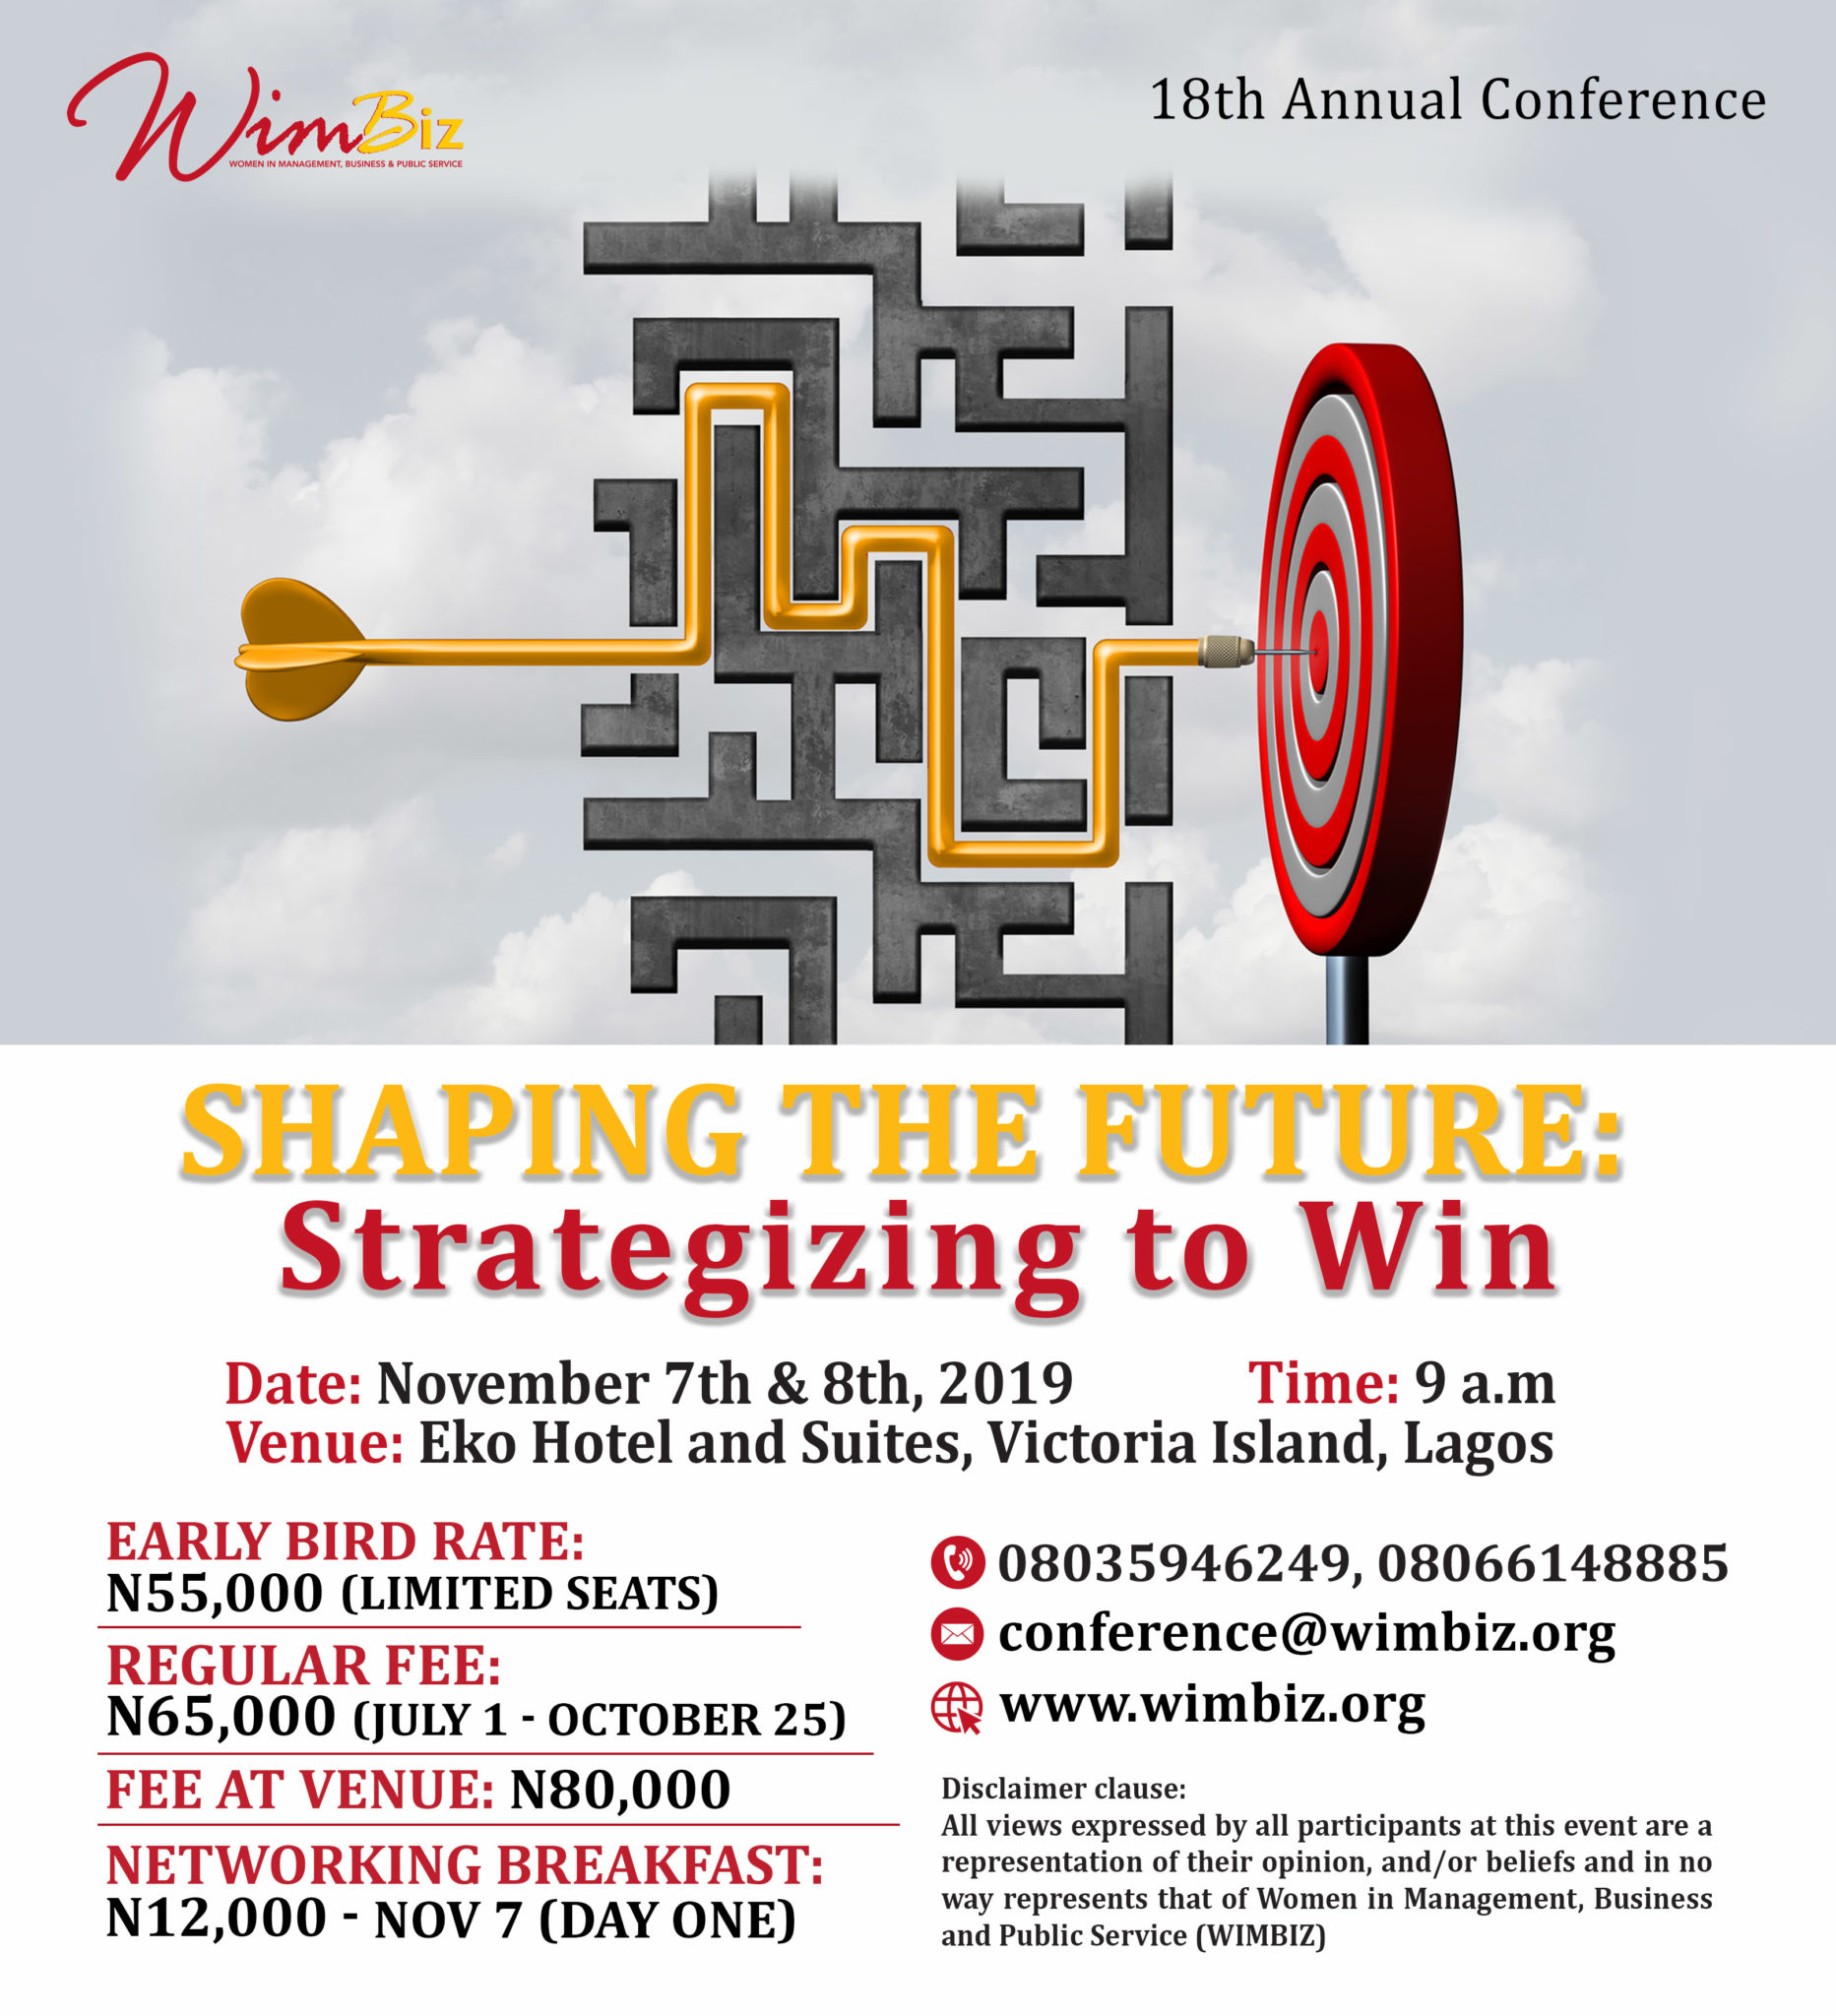 Learn How You can Strategize to Win at The 18th WIMBIZ Annual Conference | November 7th & 8th